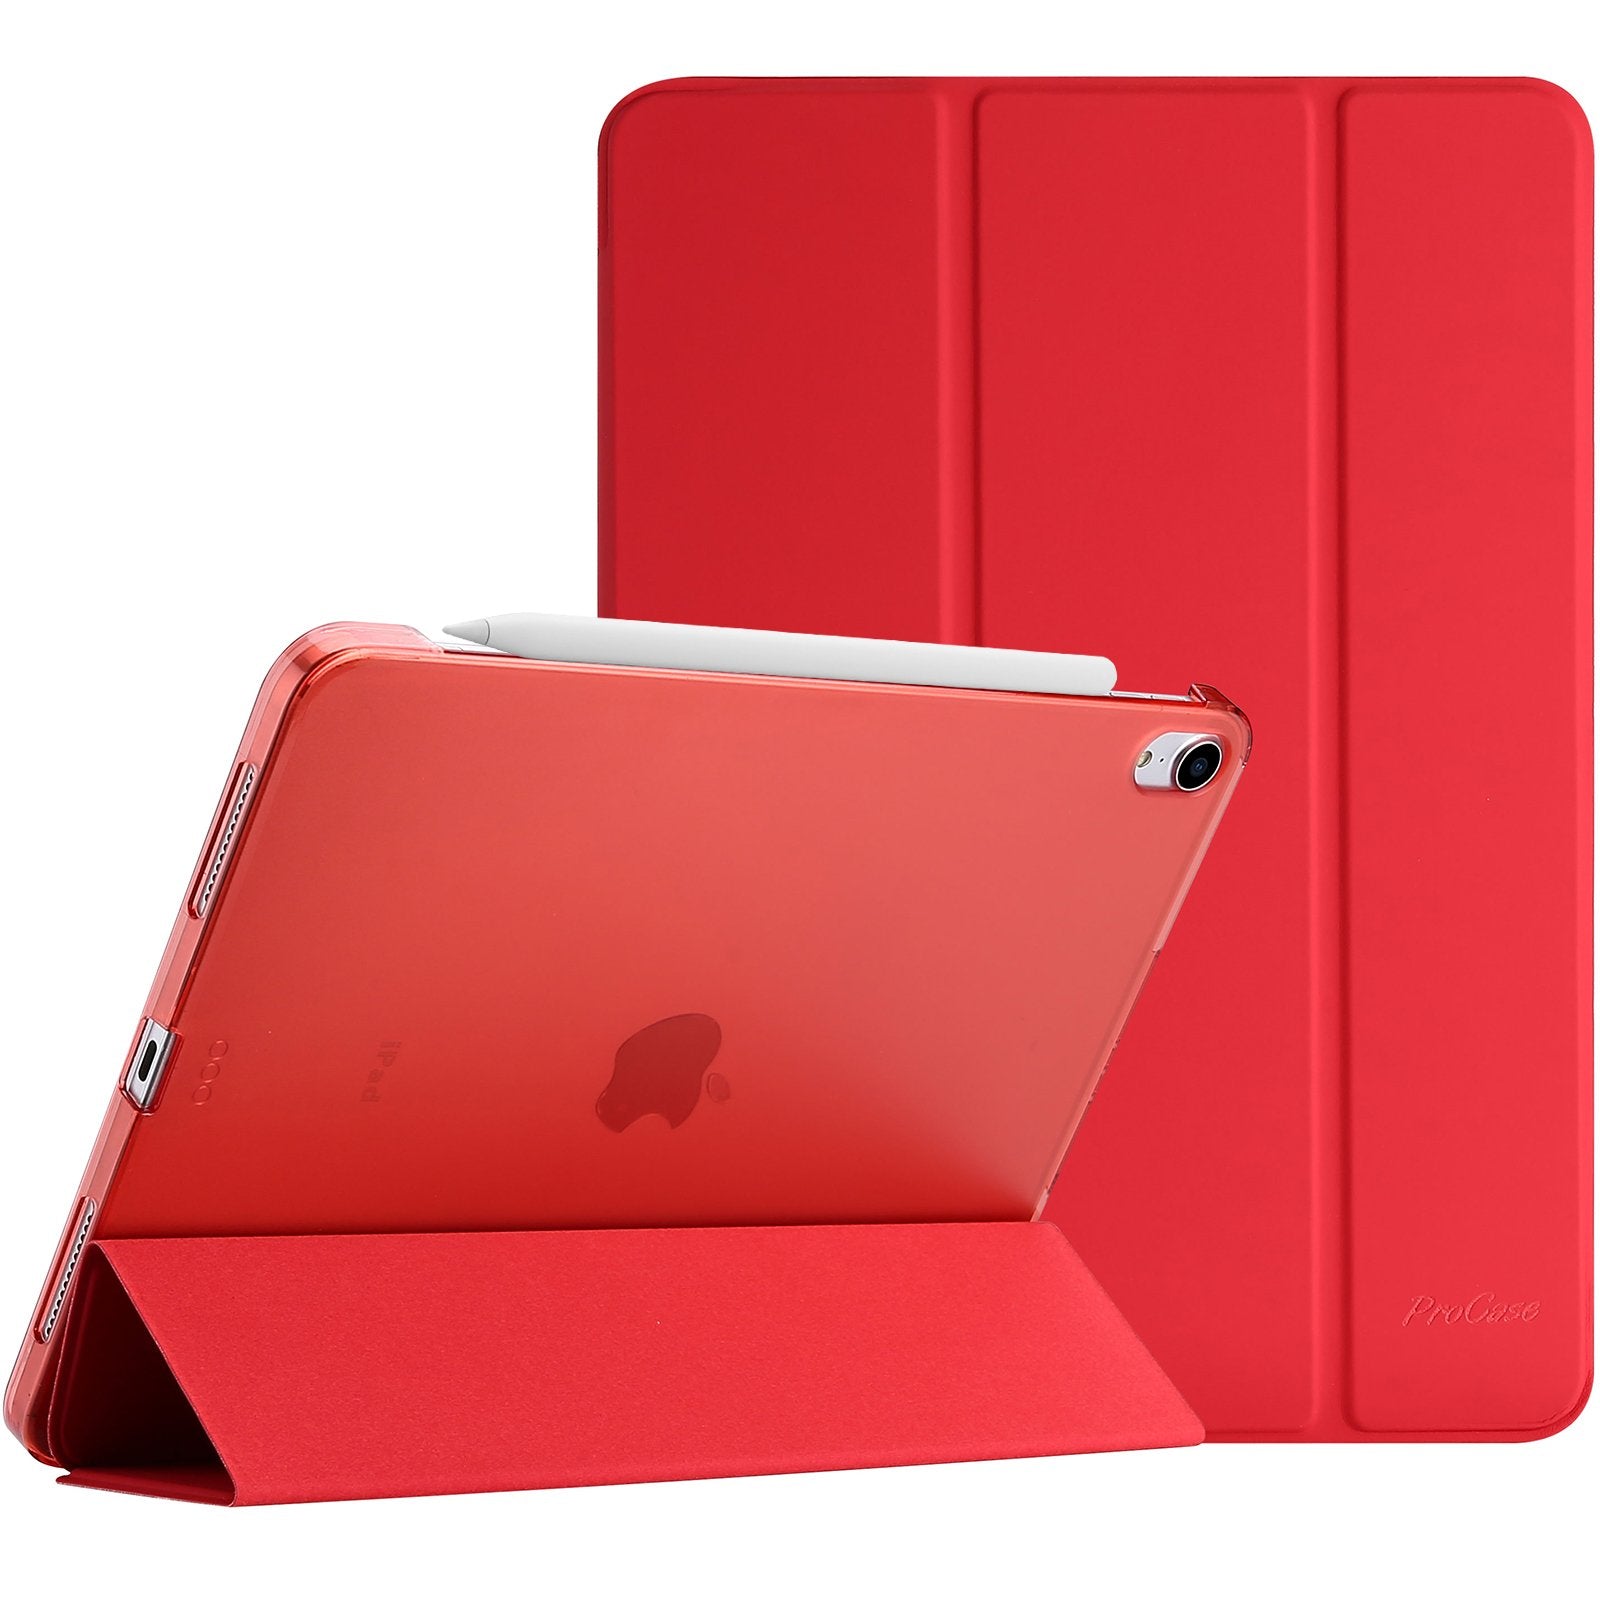 New iPad Air 10.9 4th 2020 Generation Smart Case | ProCase red